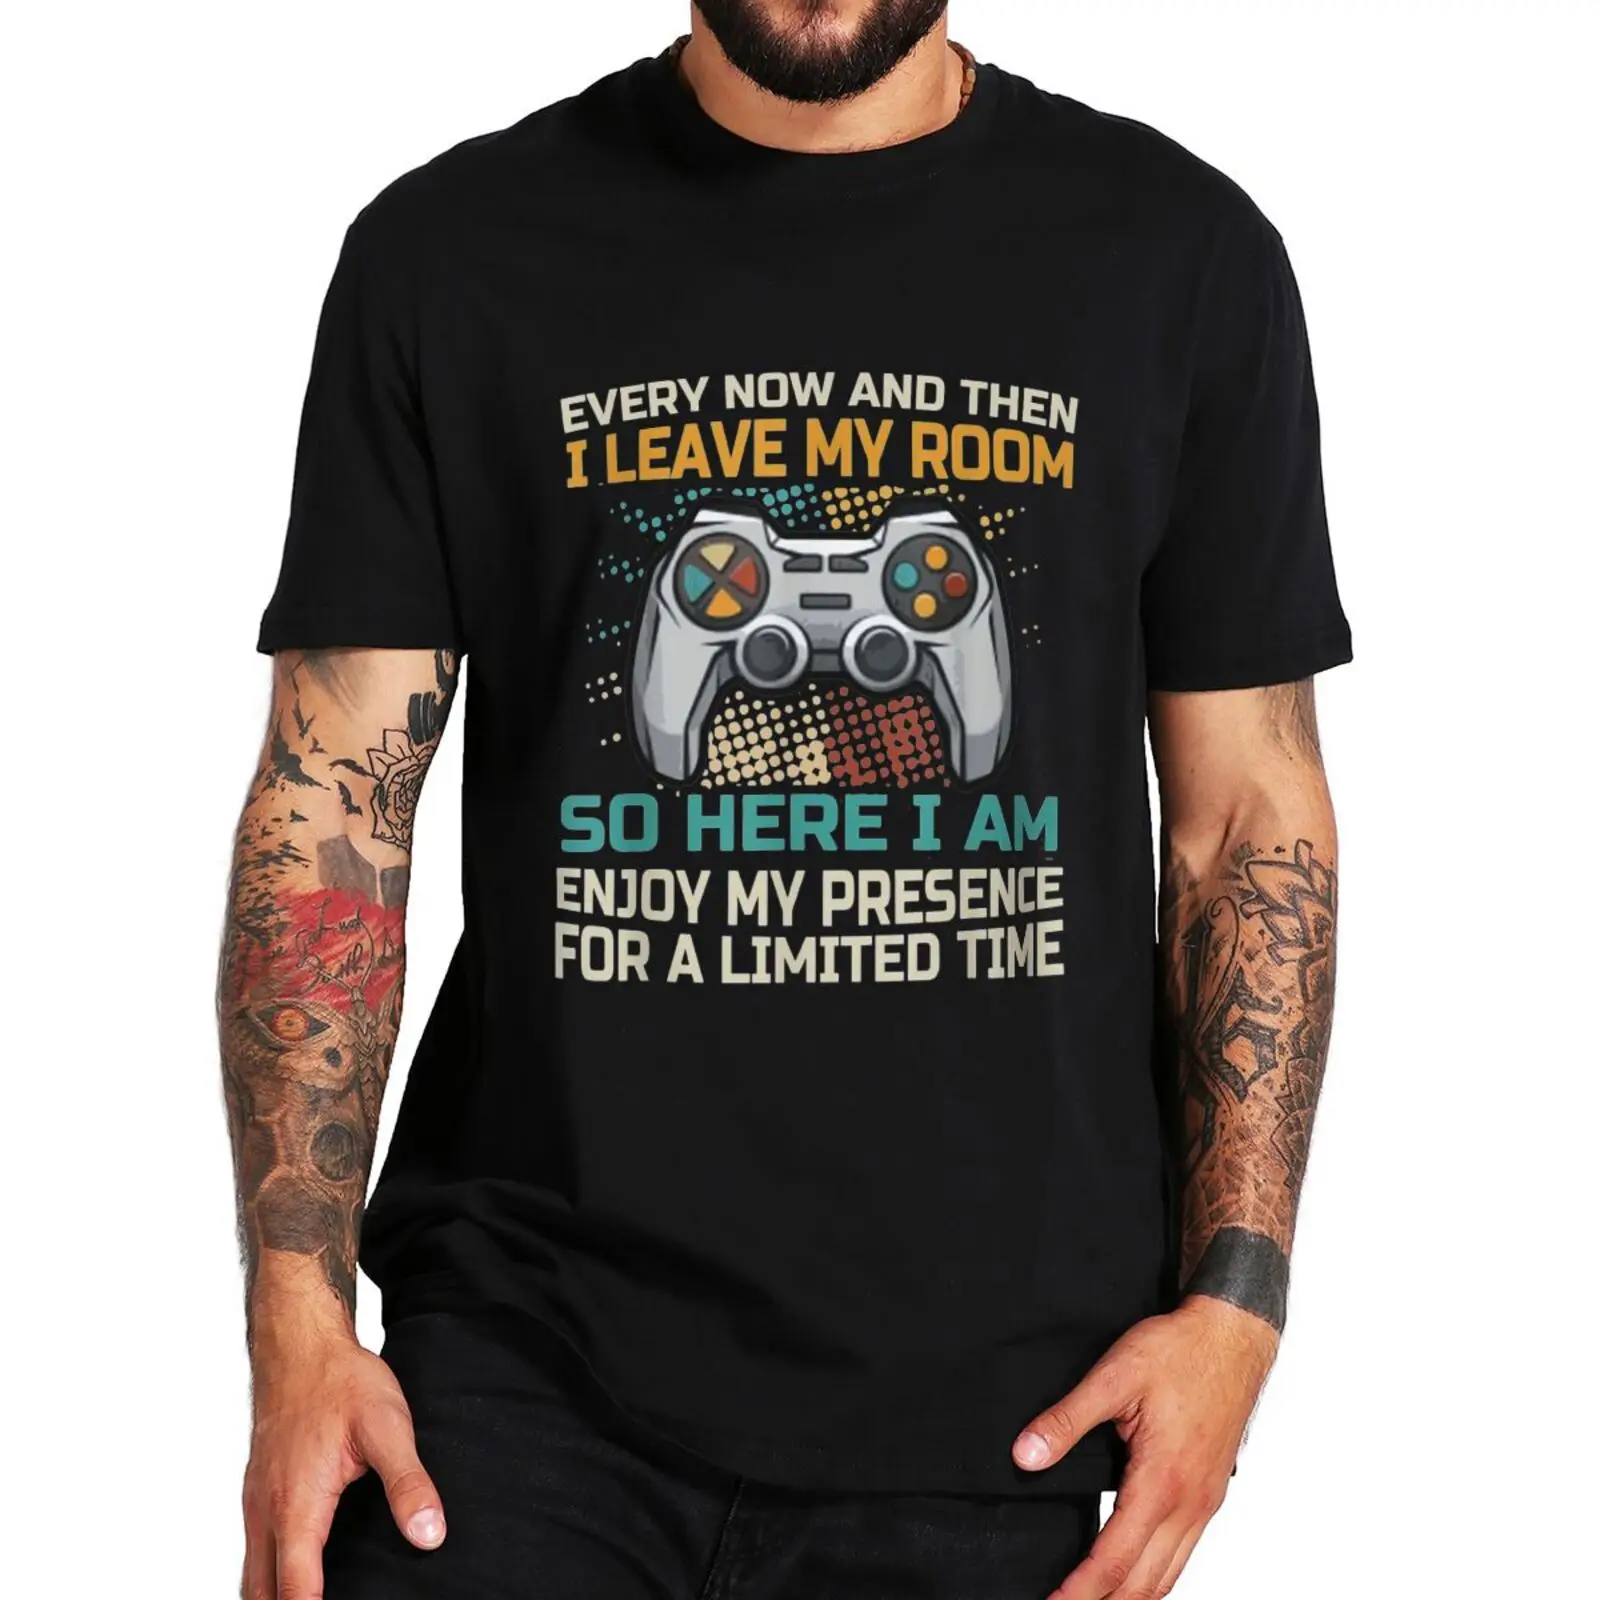 

Every Now And Then I Leave T Shirt Funny Game Lovers Geek Nerd Gamer Gift Retro Tee Tops Casual 100% Cotton Unisex Soft T-shirts